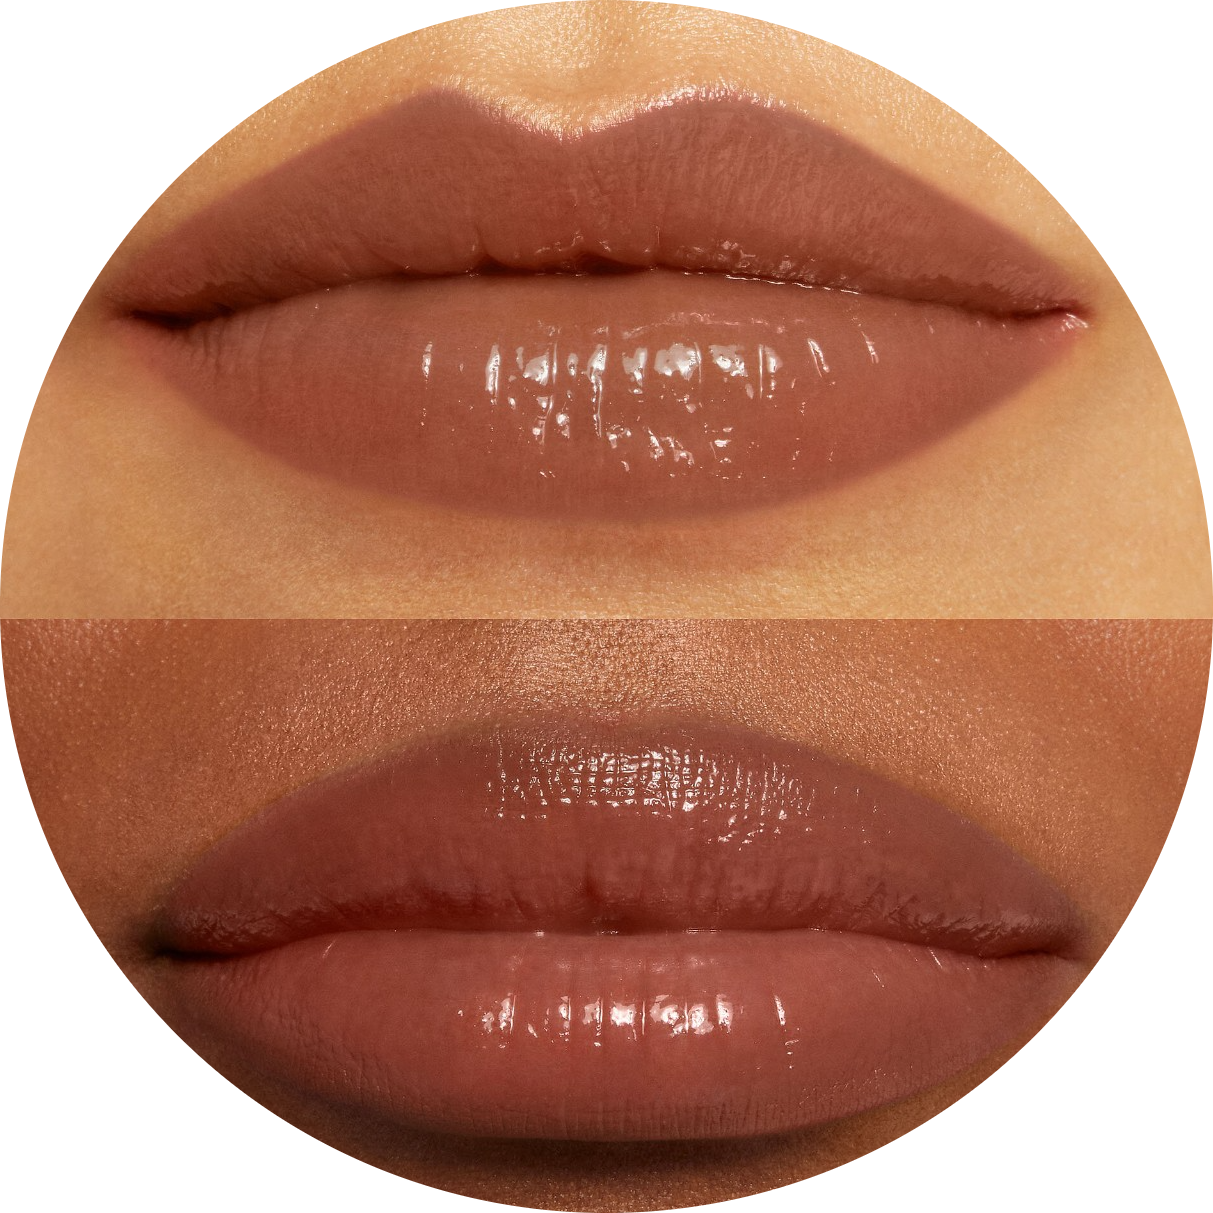 Soft Pinch Tinted Lip Oil NudeFace Chile